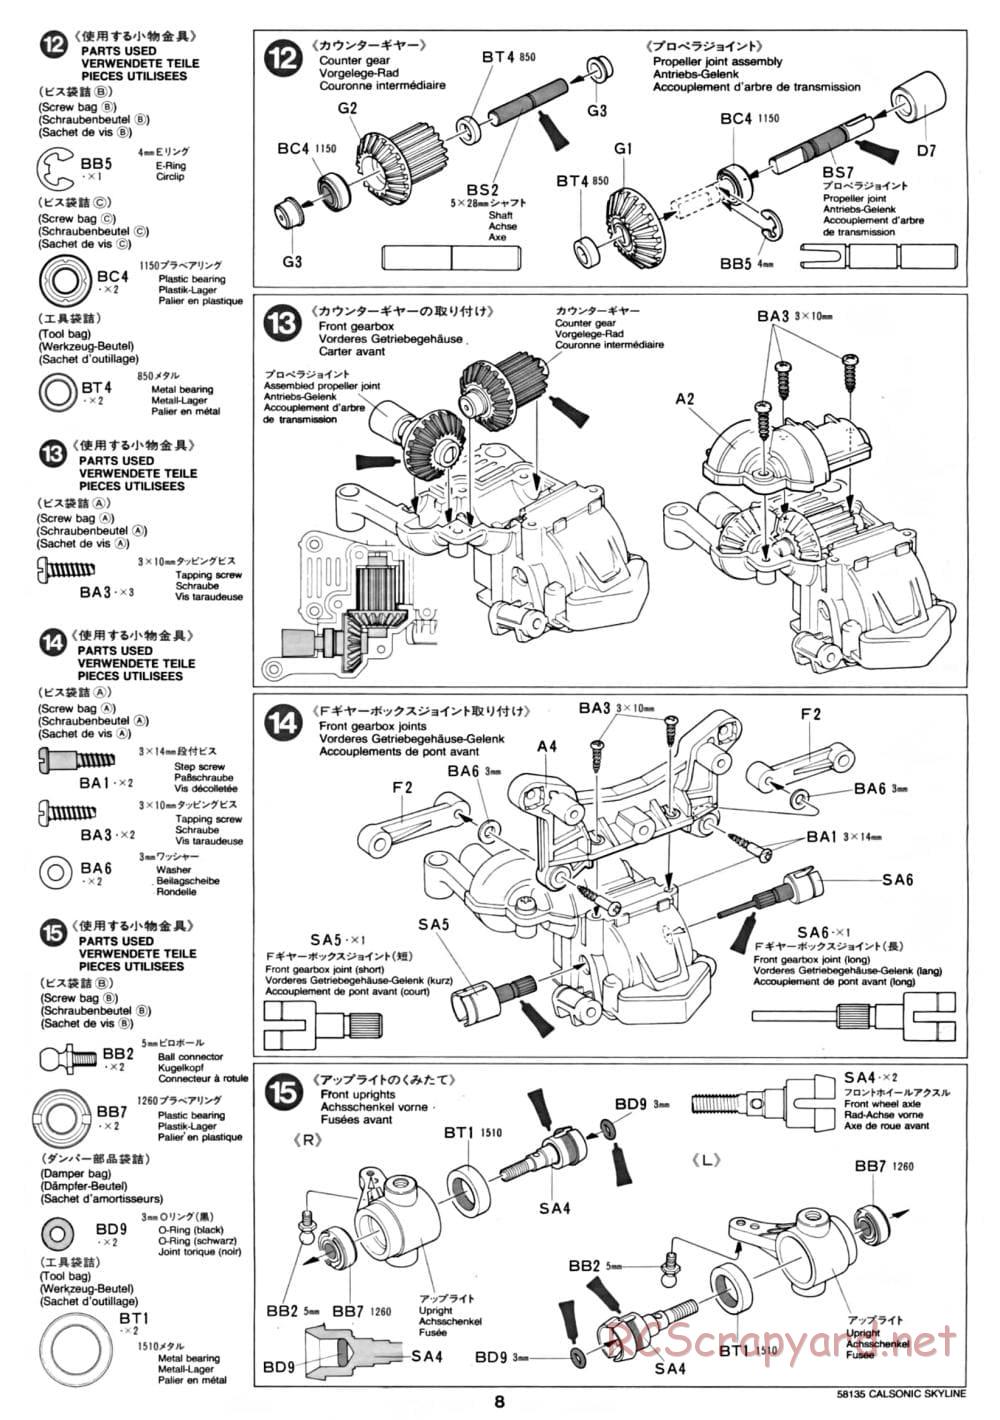 Tamiya - Calsonic Skyline GT-R Gr.A - TA-02 Chassis - Manual - Page 8